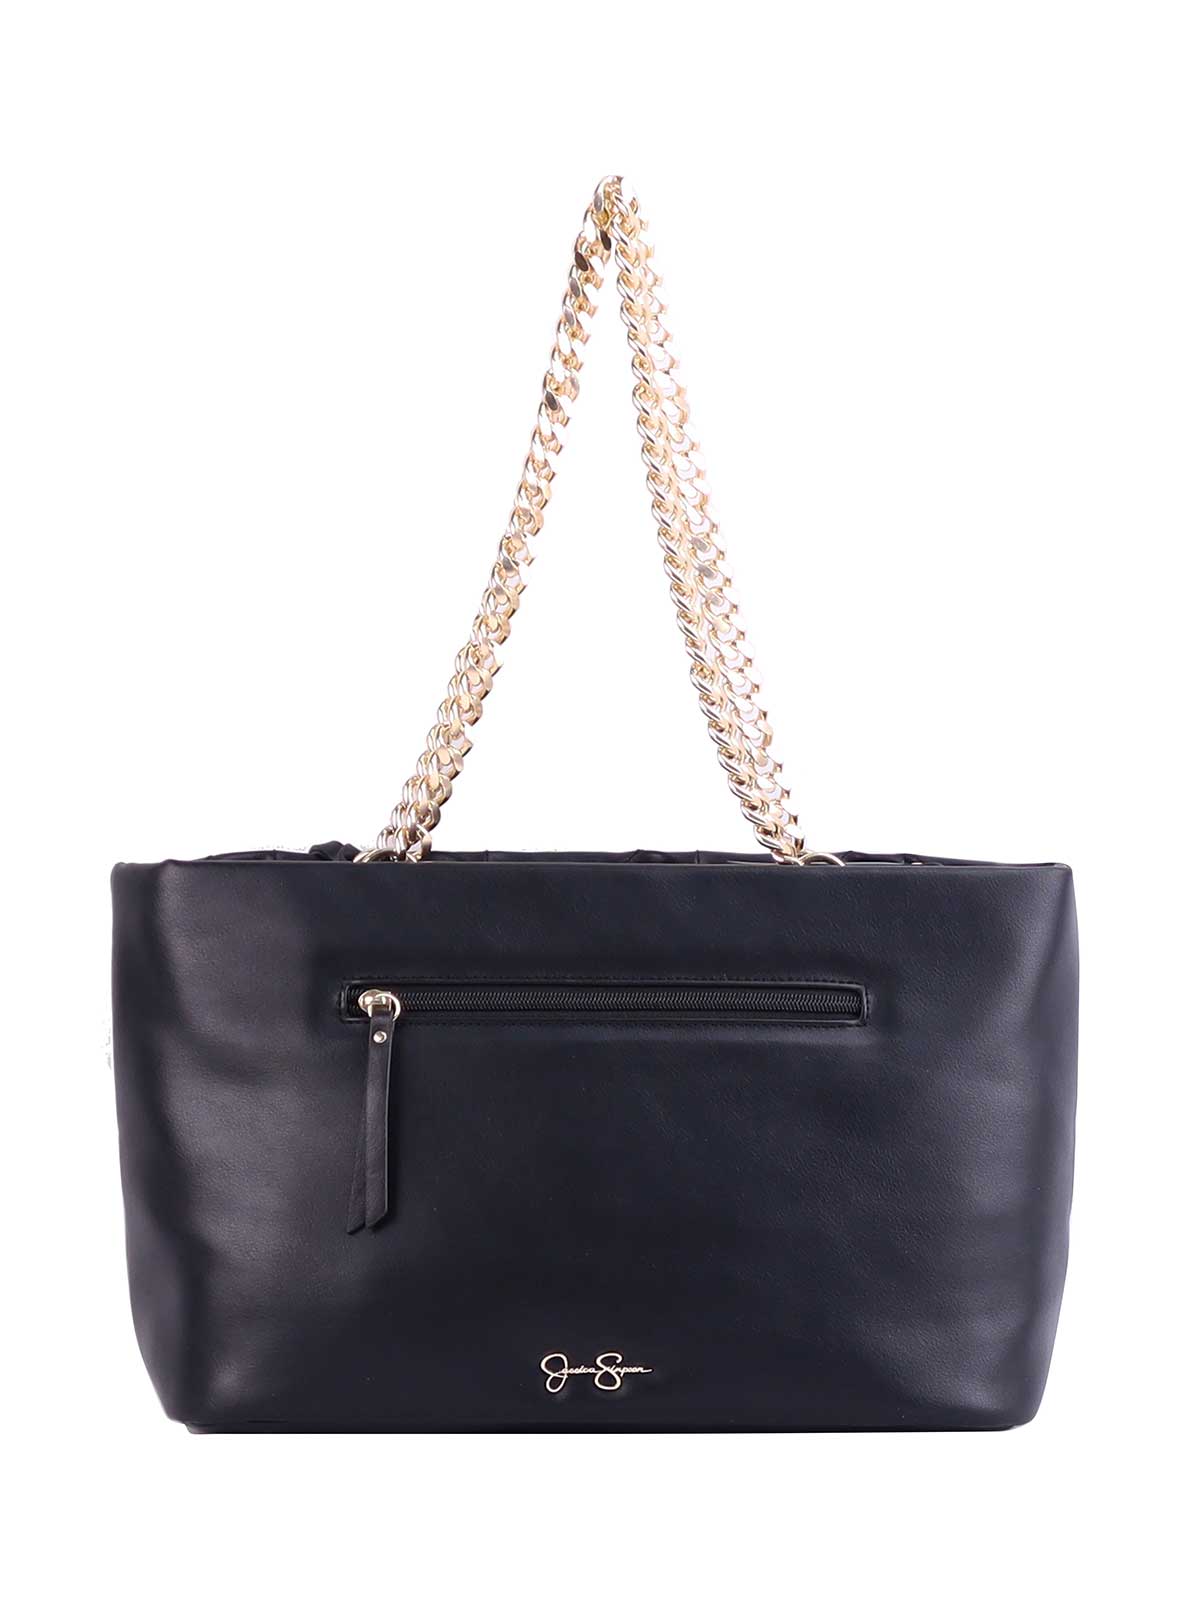 Women's Jessica Simpson Shoulder bags from $45 | Lyst